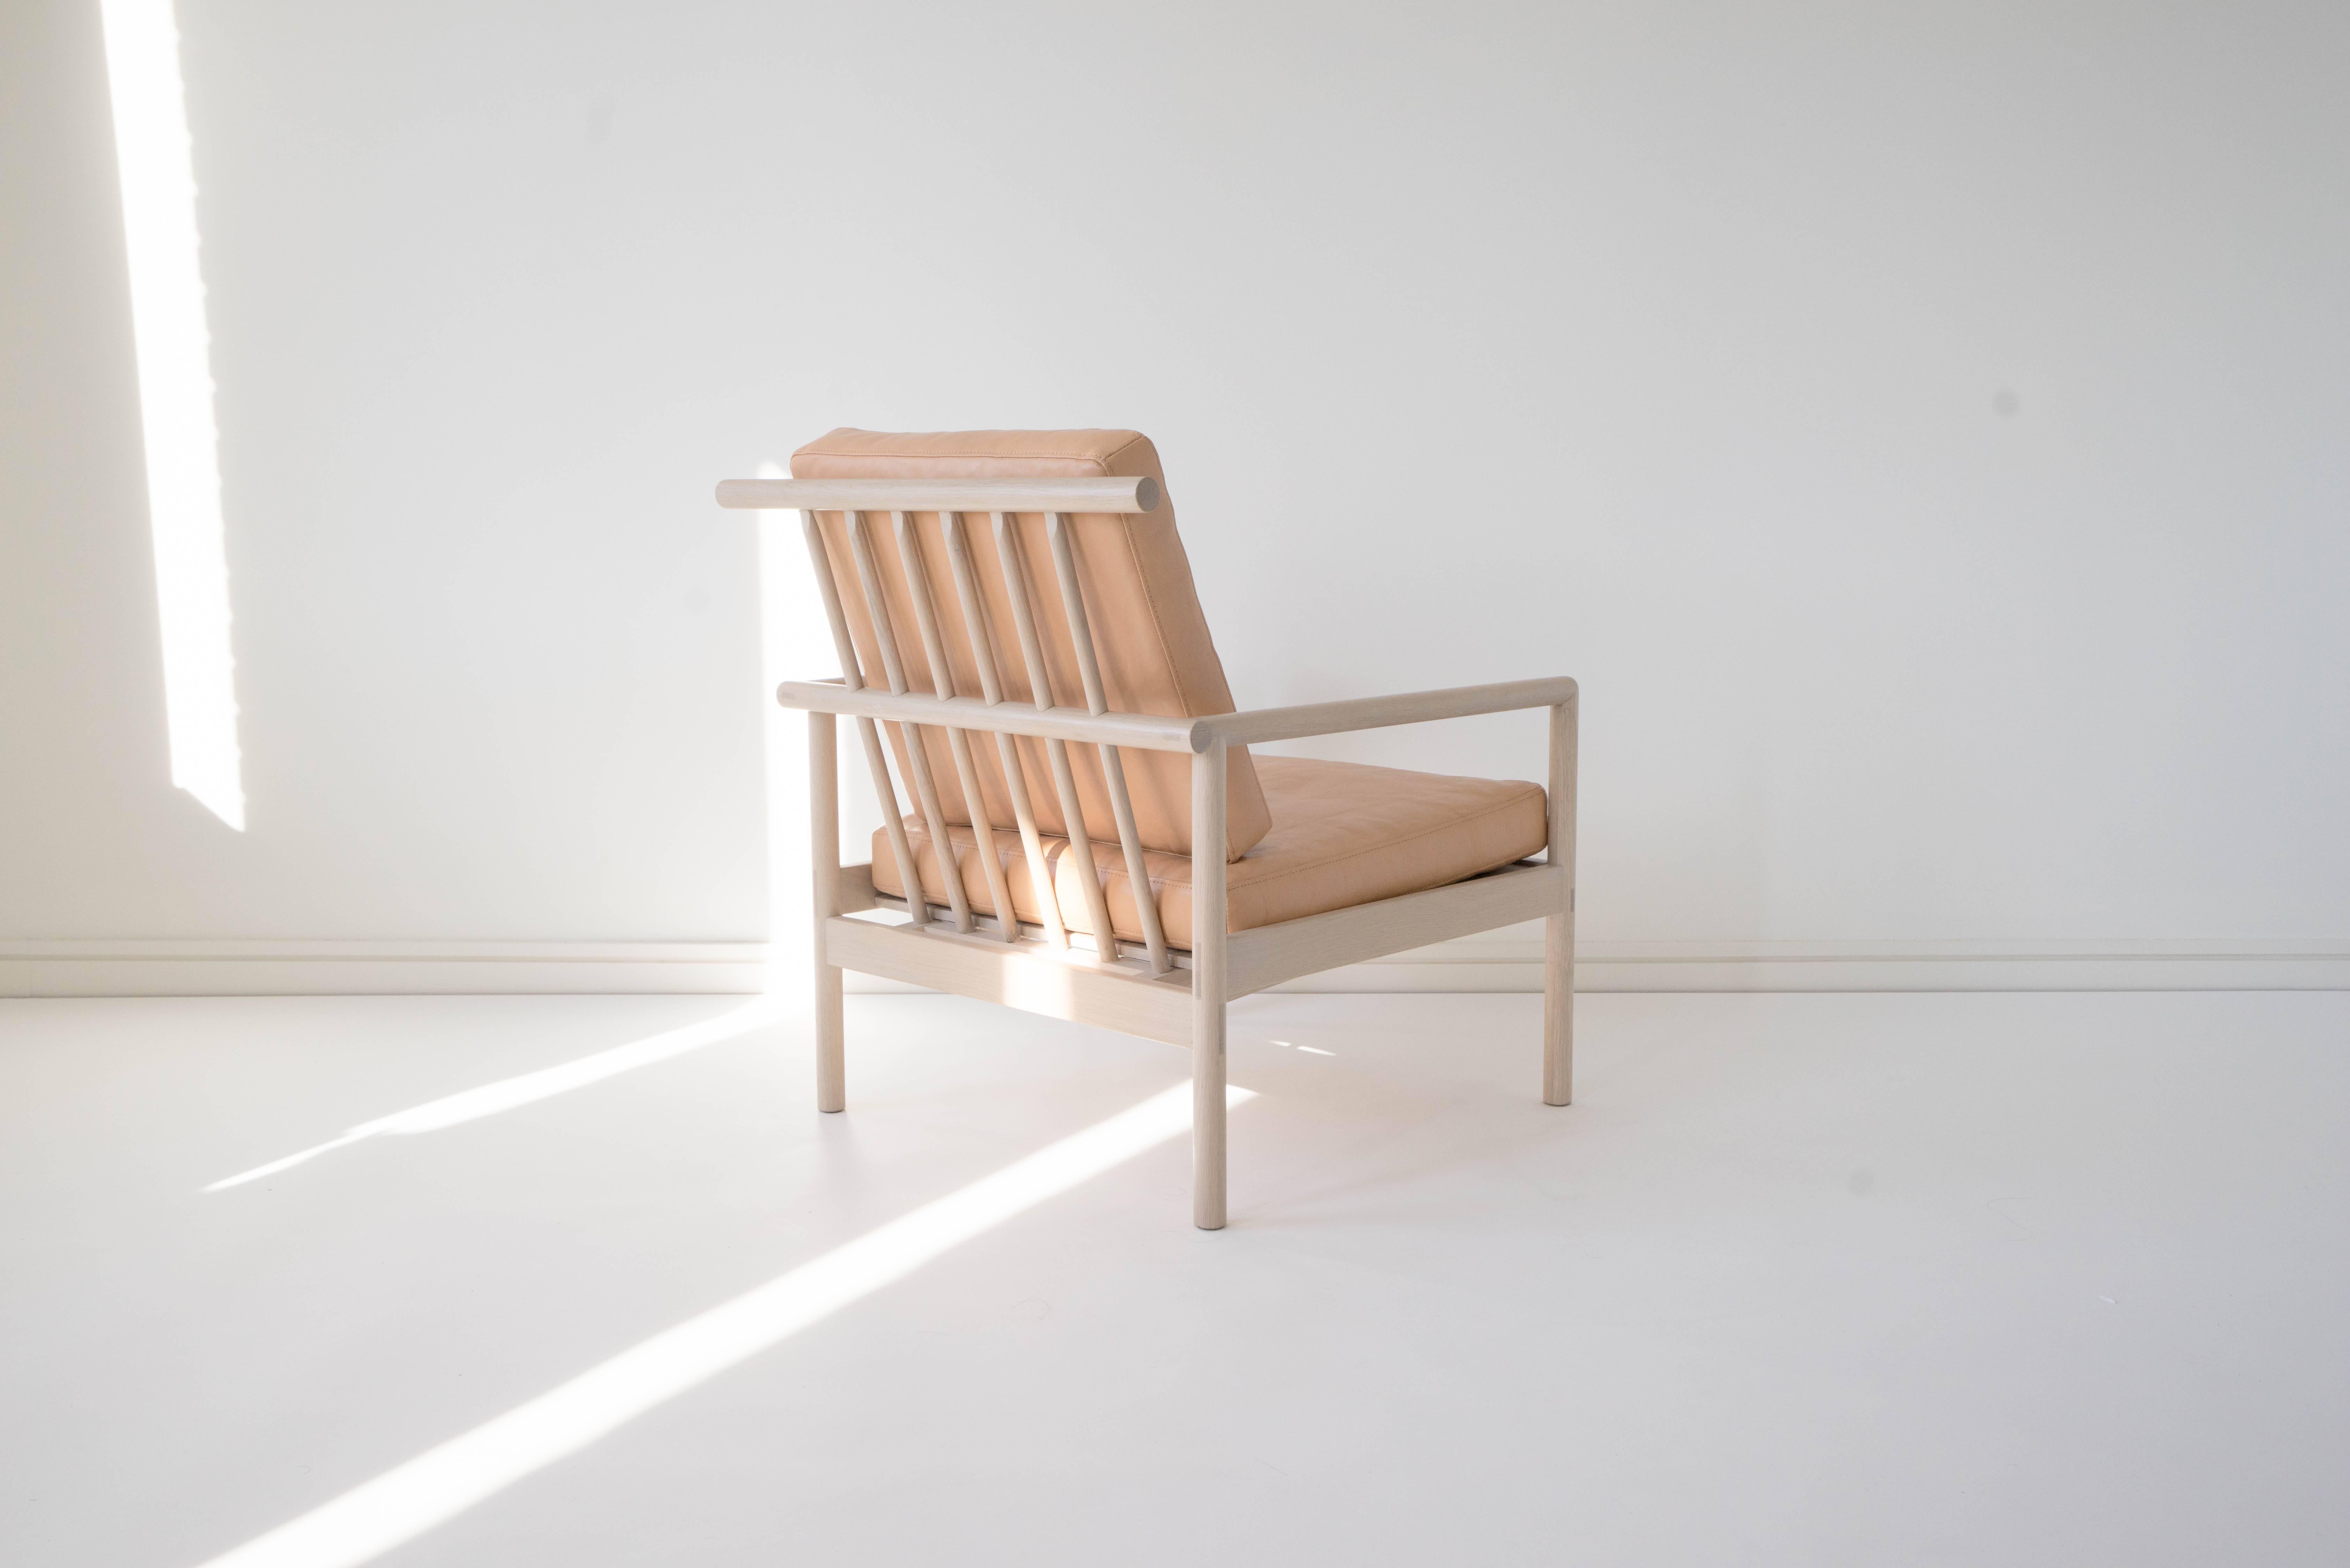 Sun at Six is a Brooklyn design studio. Handcrafted using traditional joinery. Vegetable tanned leather will patina with age. Exposed joinery throughout.

• Solid white oak
• Tung oil finish
• Full-grain vegetable tanned leather
•